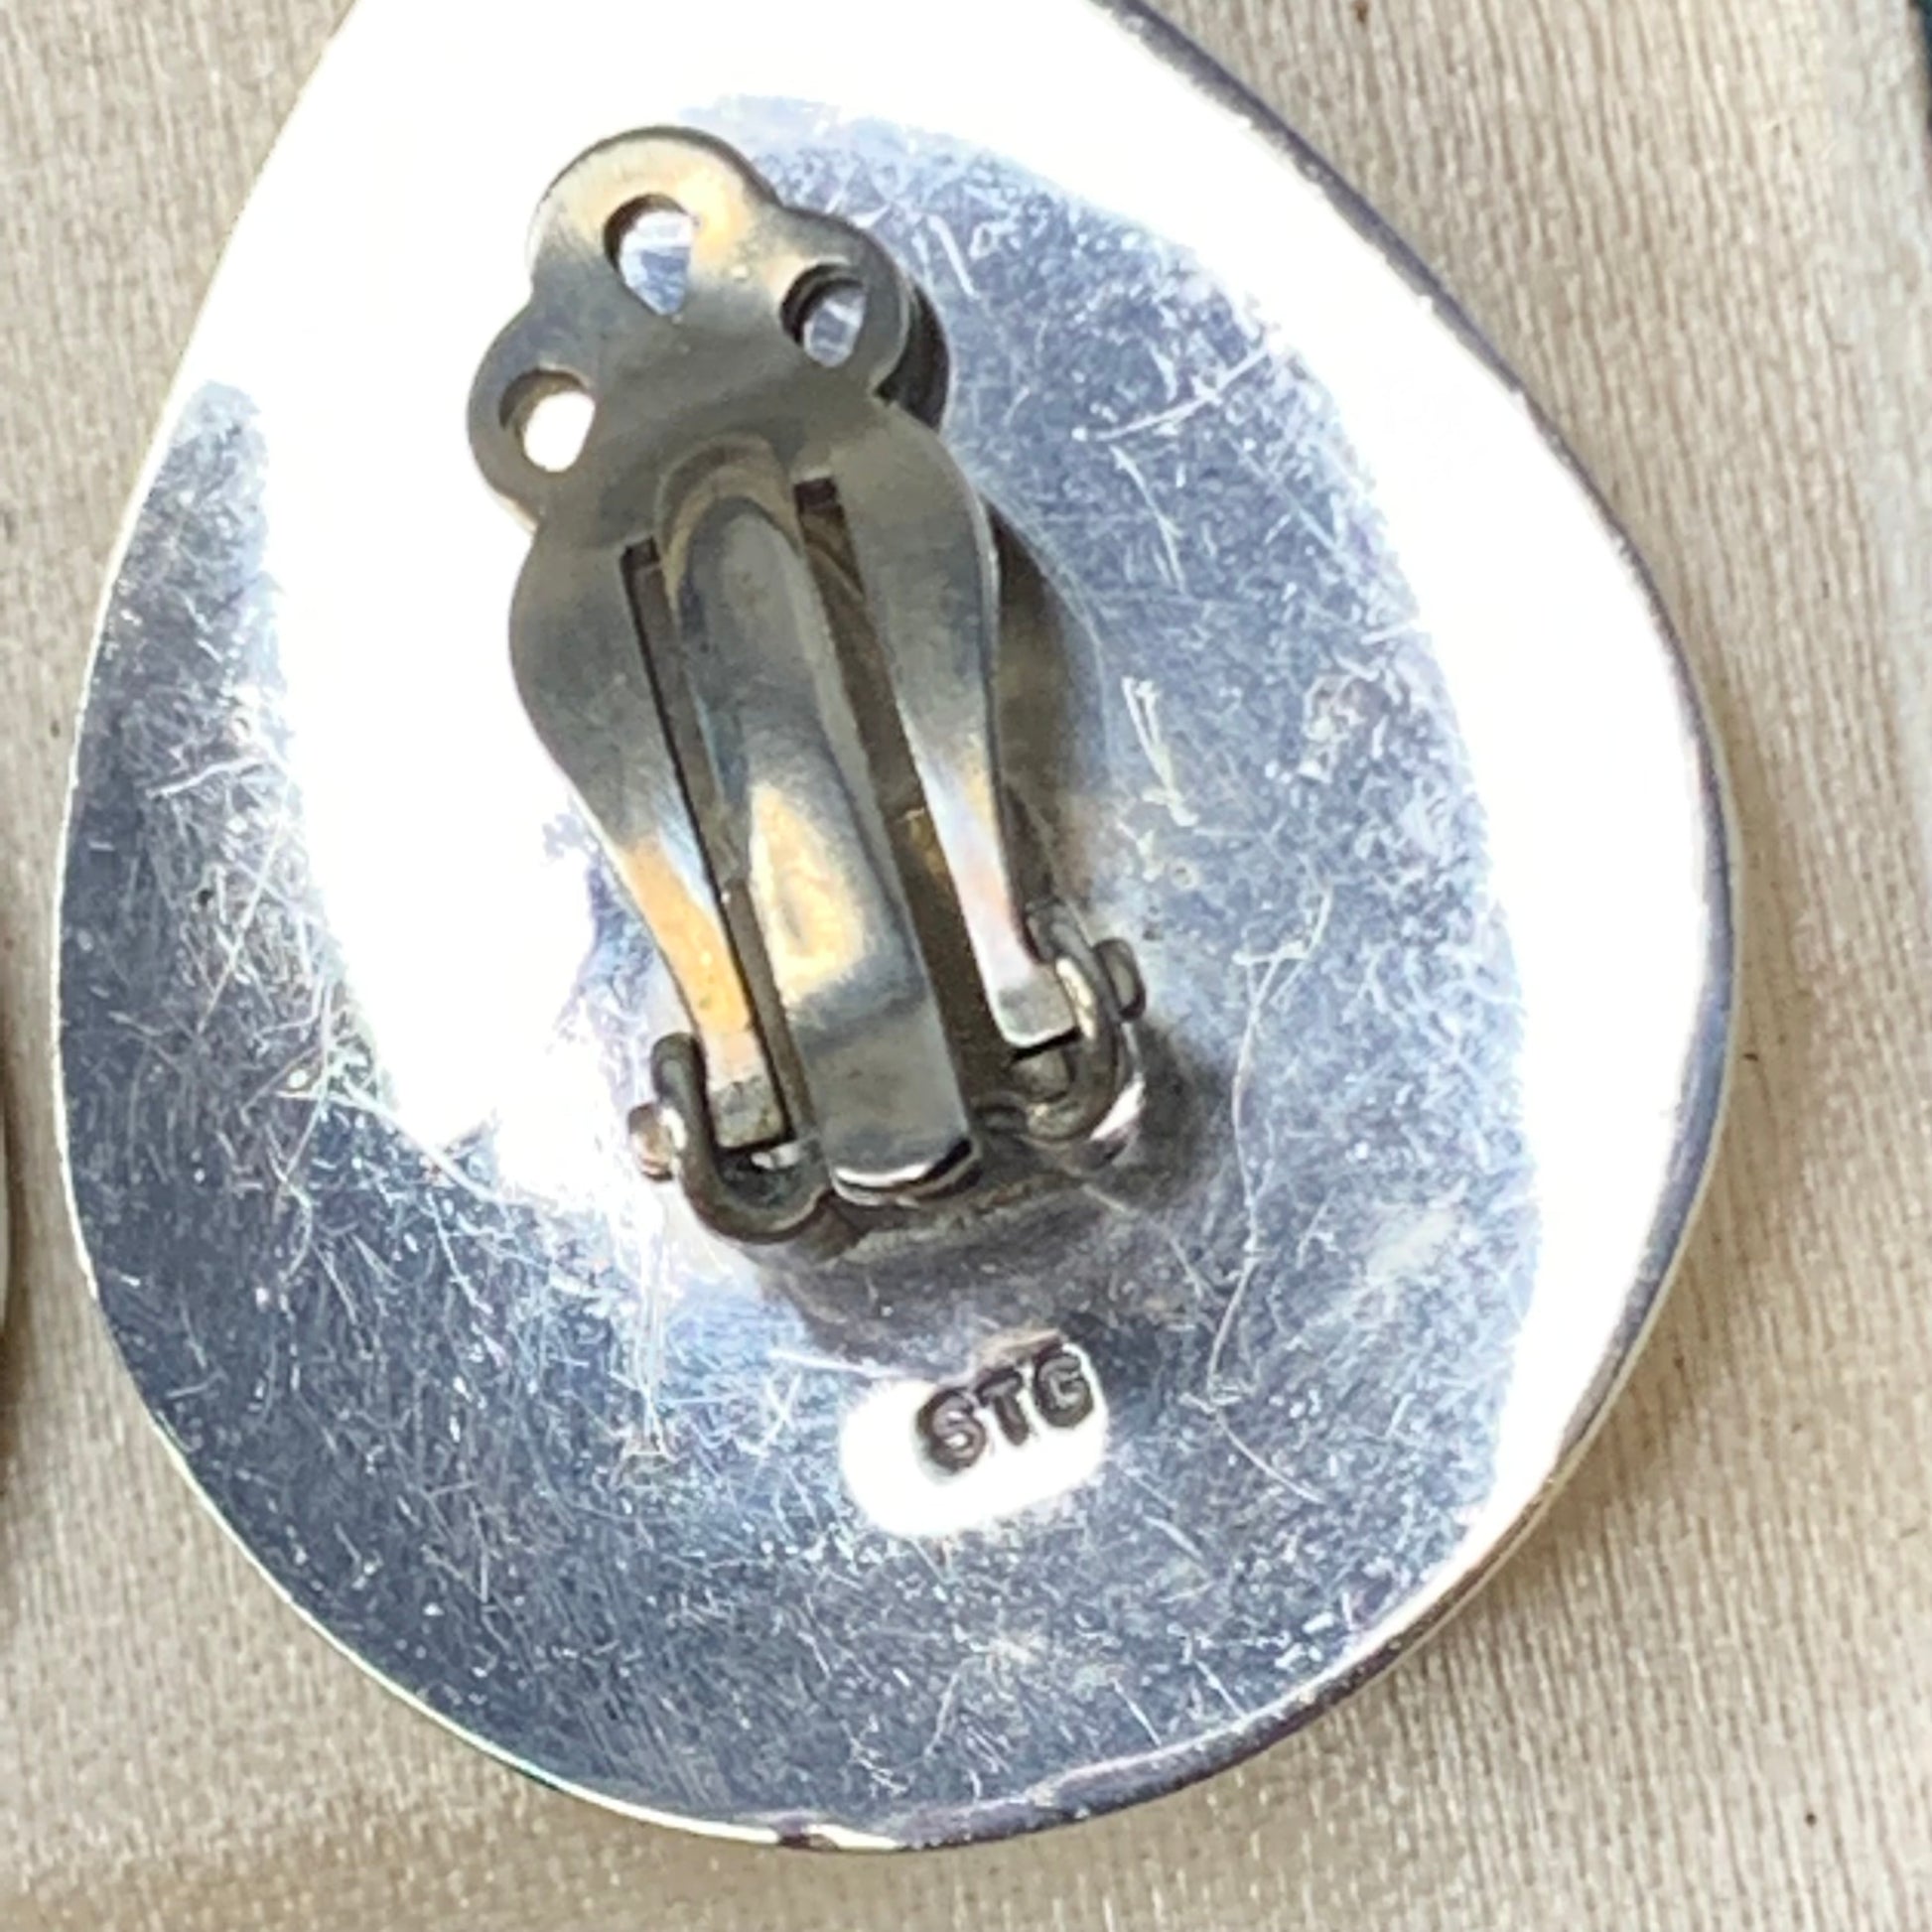 marked ste for sterling silver